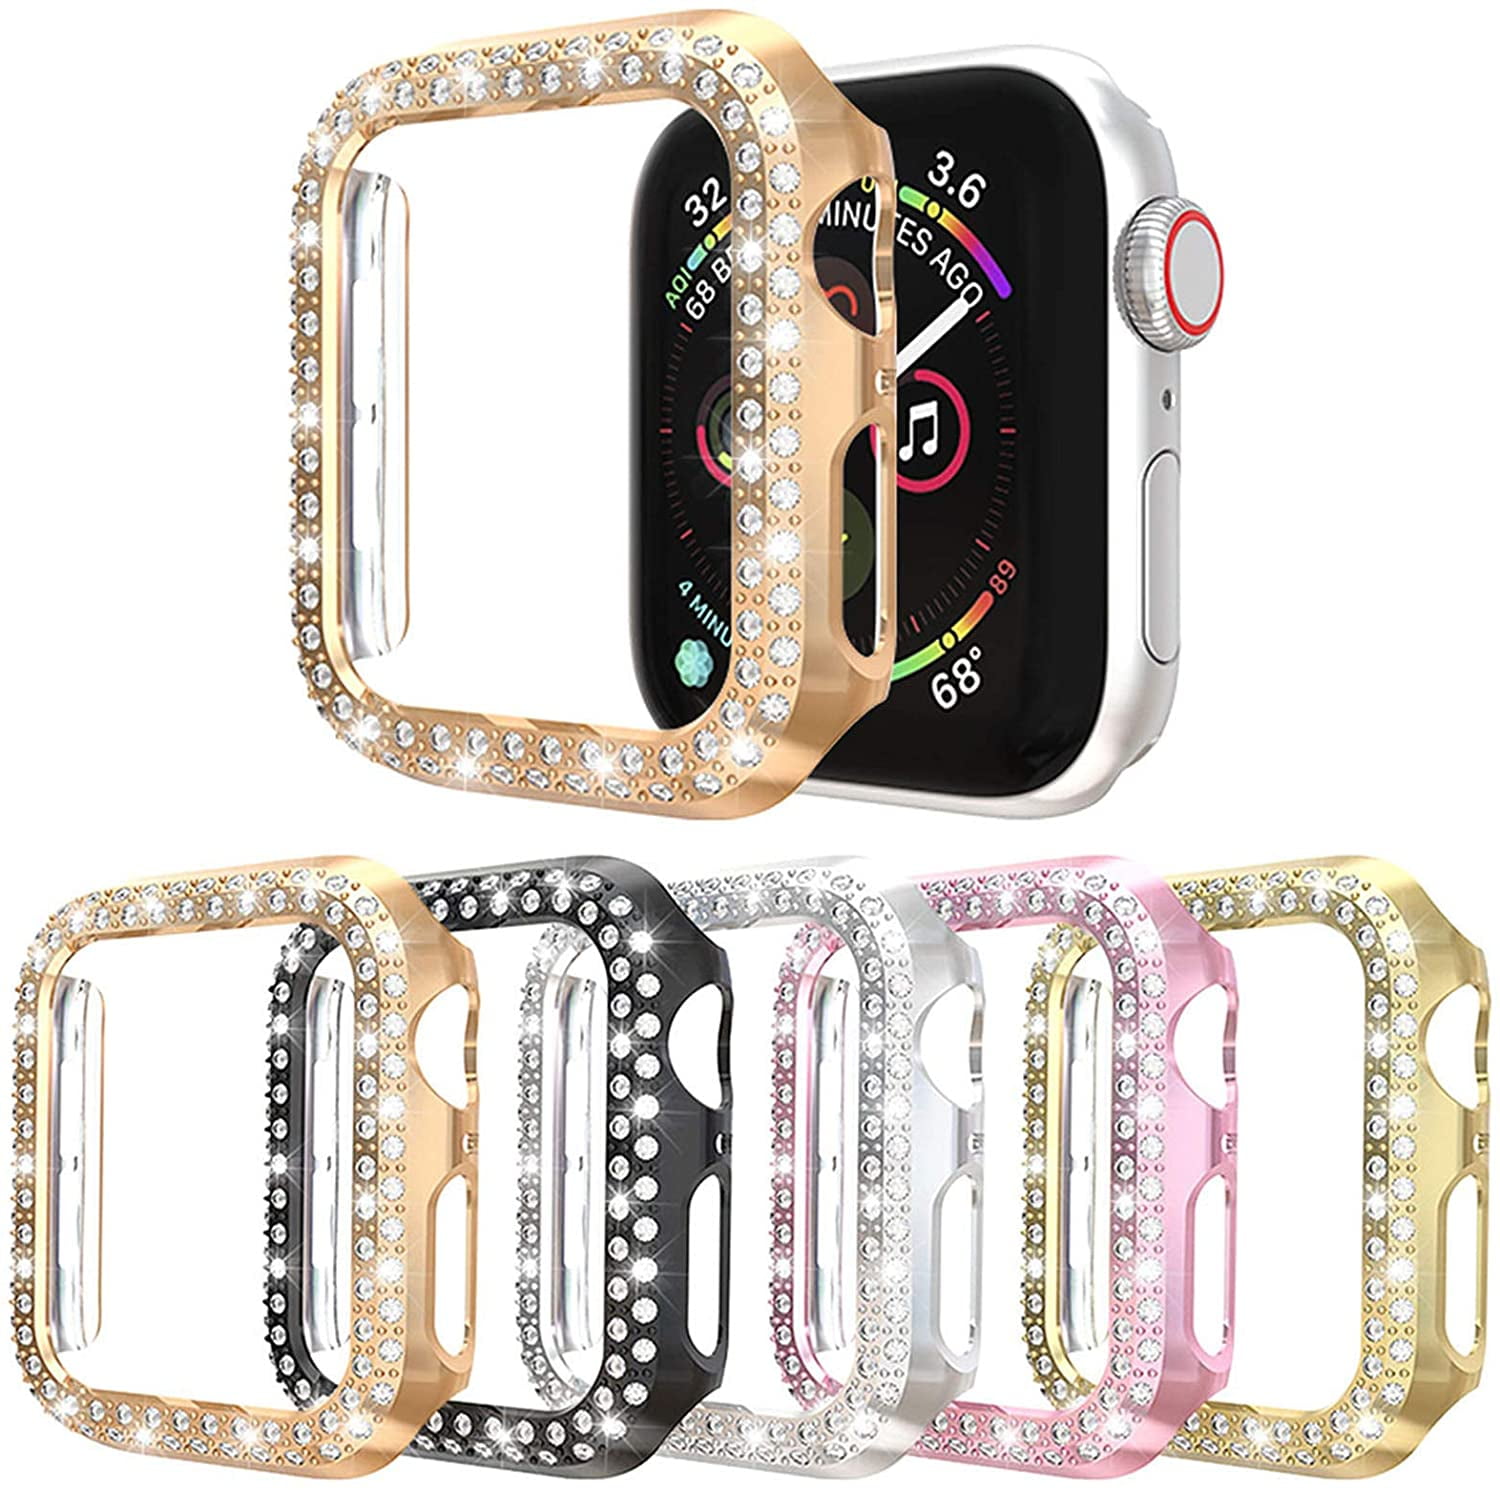 Bling Case Compatible for Apple Watch Case 40mm Series 6/5 /4 /SE, Women  Girl Luxury Sparkling Crystal Diamond Stainless Metal Bezel Case Cover